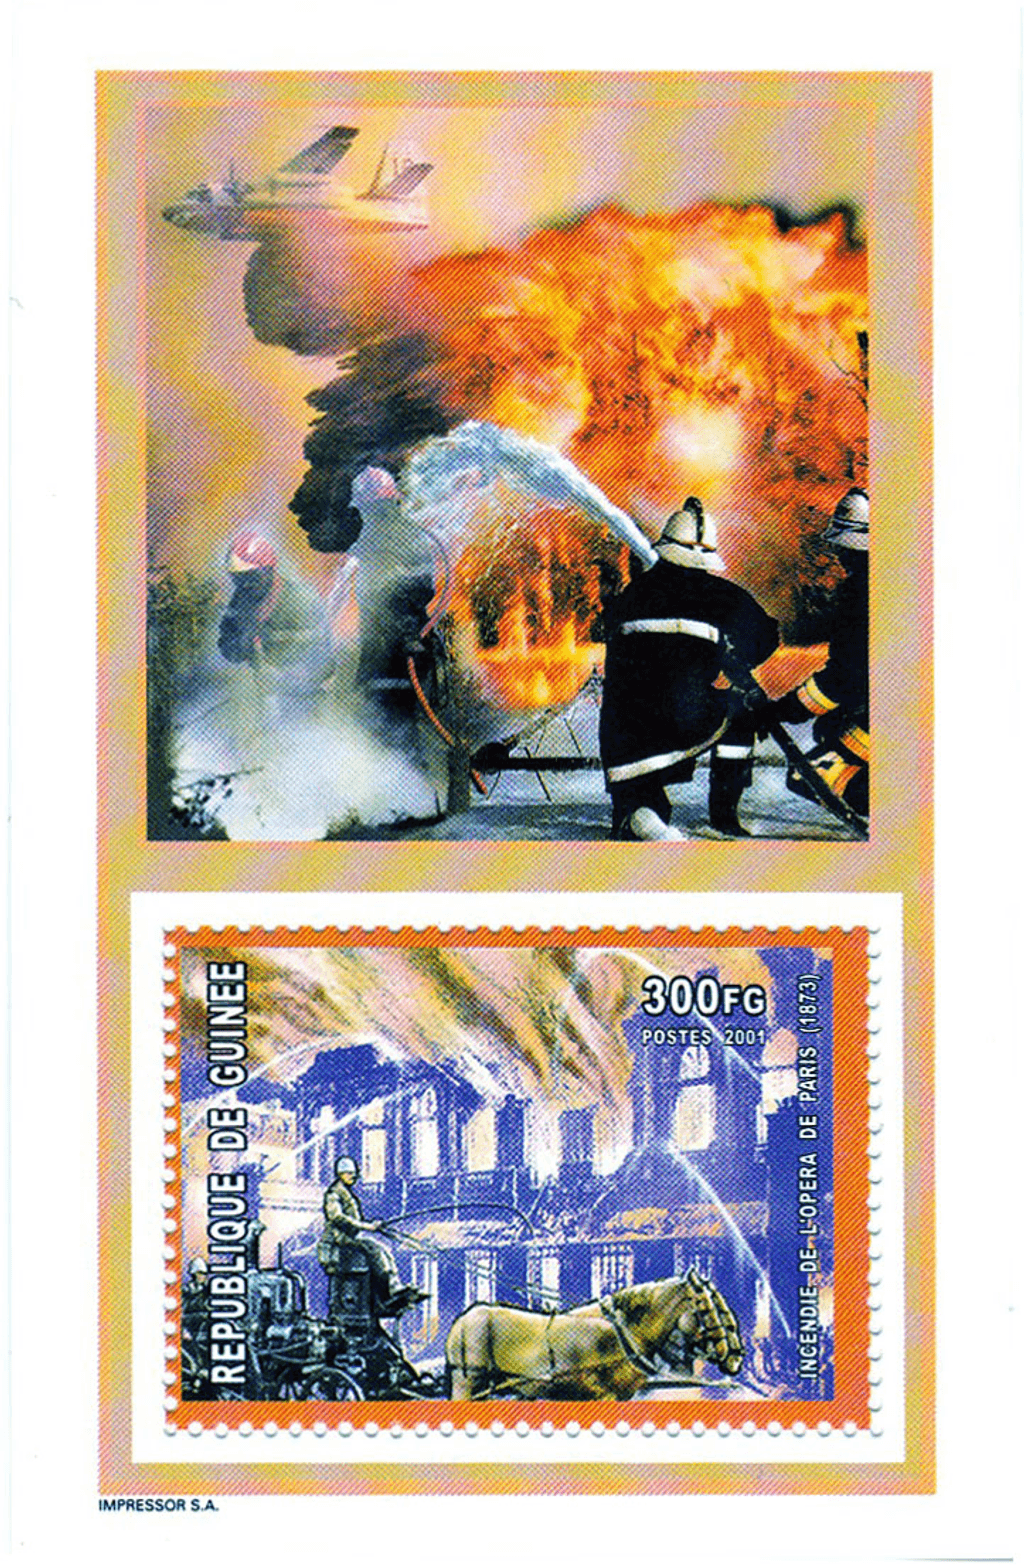 History of the fire department 2001